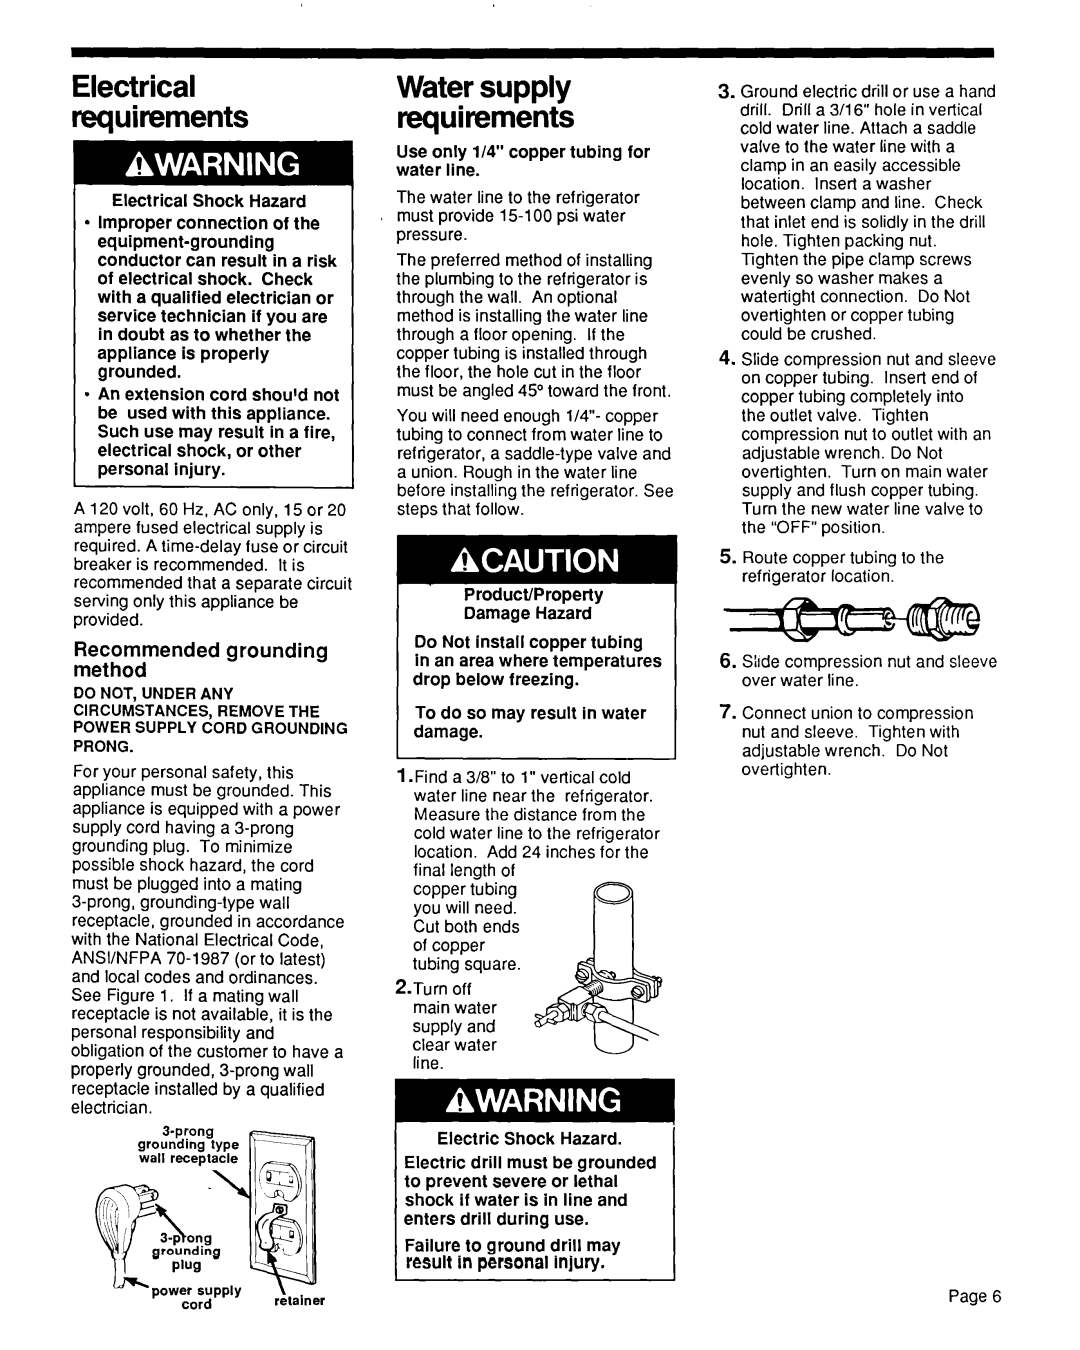 KitchenAid KSRF36DT manual Electrical requirements, Recommended grounding met hod, I result in personal injury 